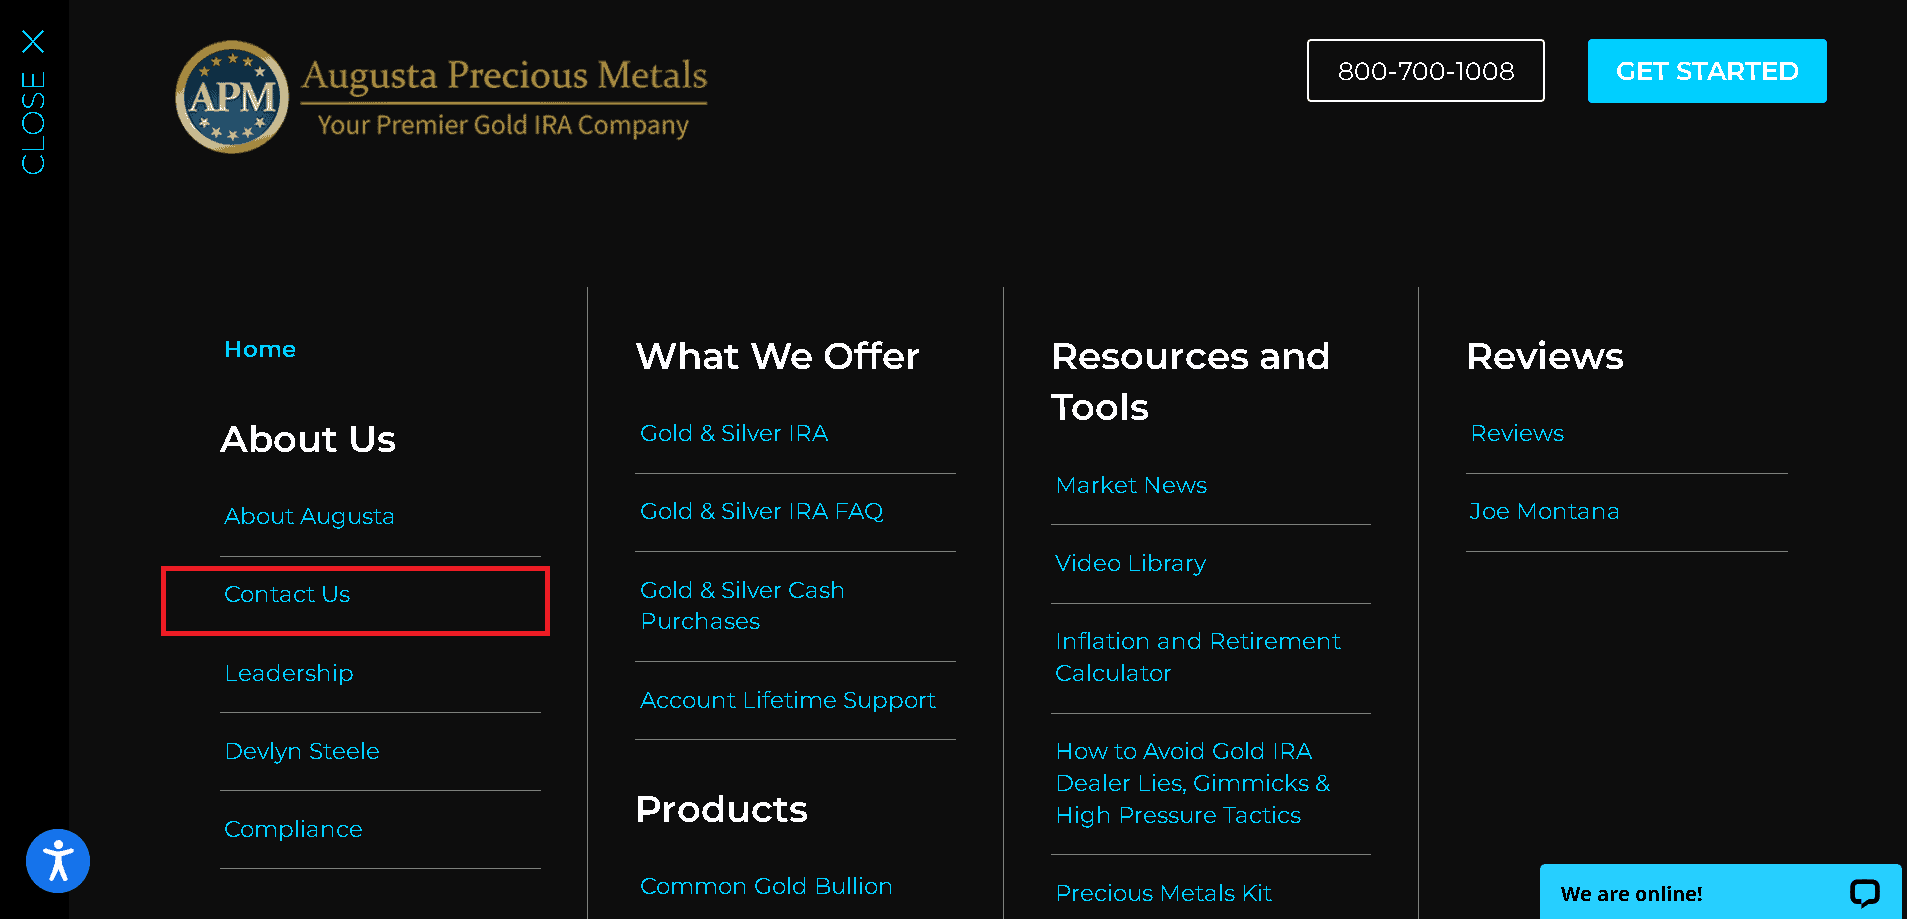 reach the contact us page within the Augusta Precious Metals website